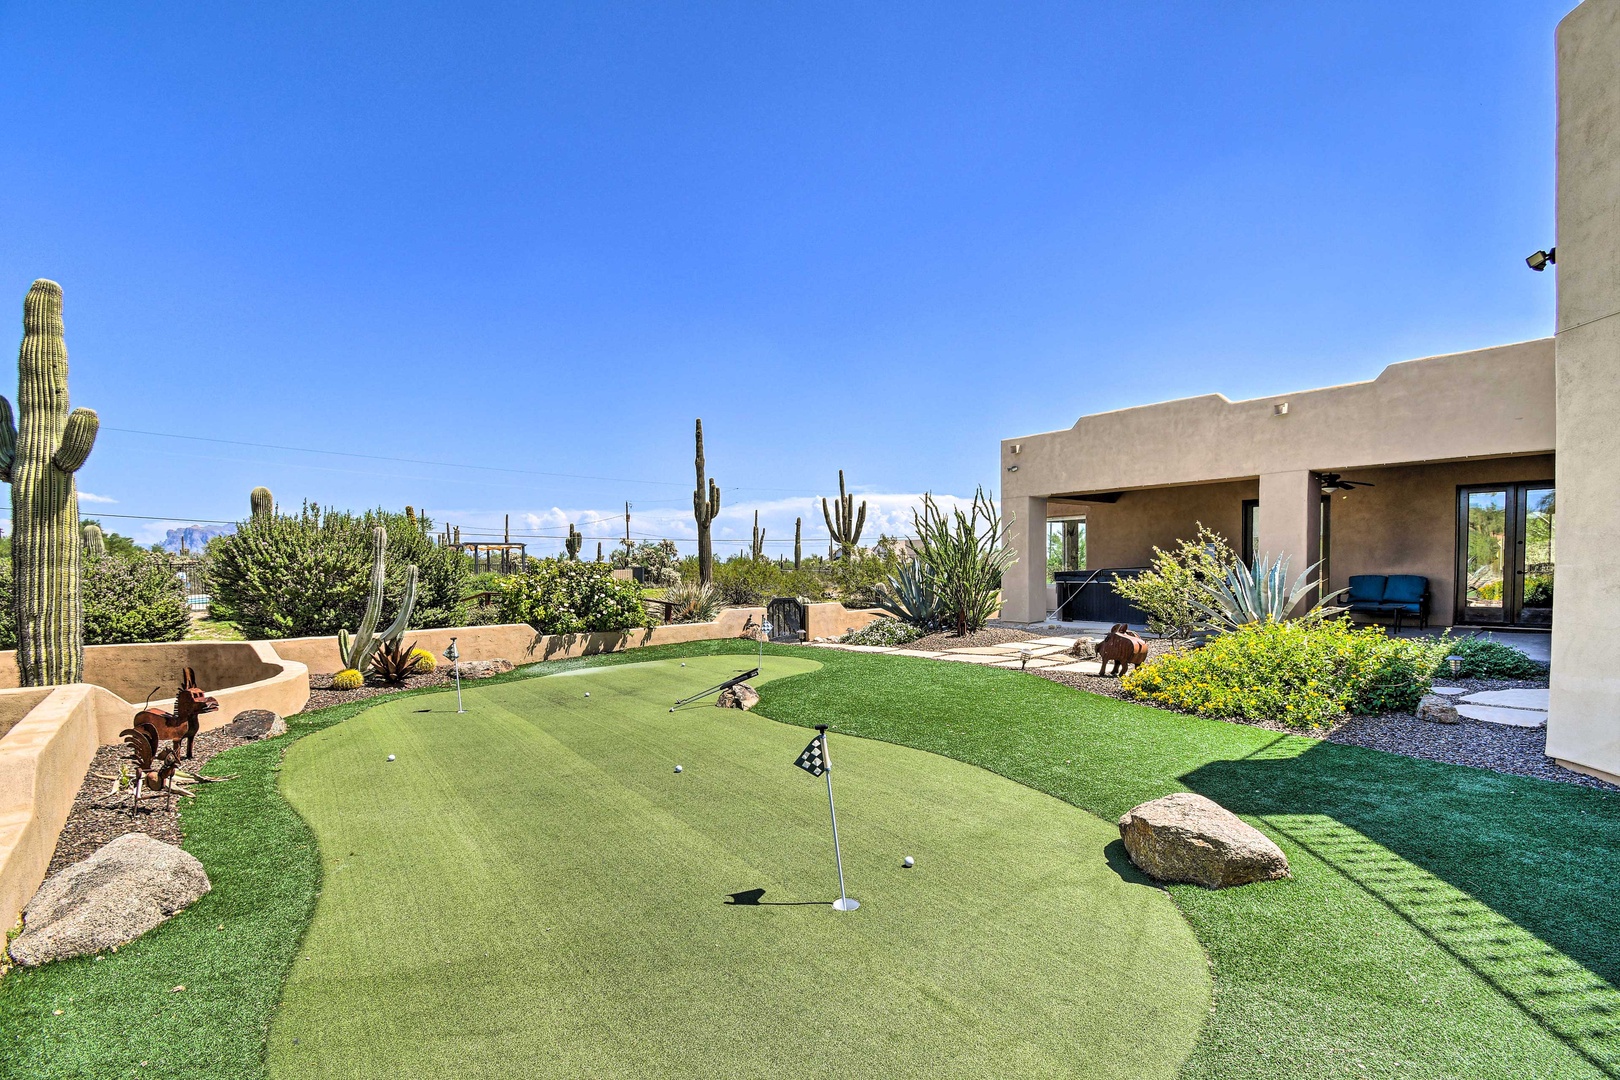 Break out the clubs & practice your putt with breathtaking views